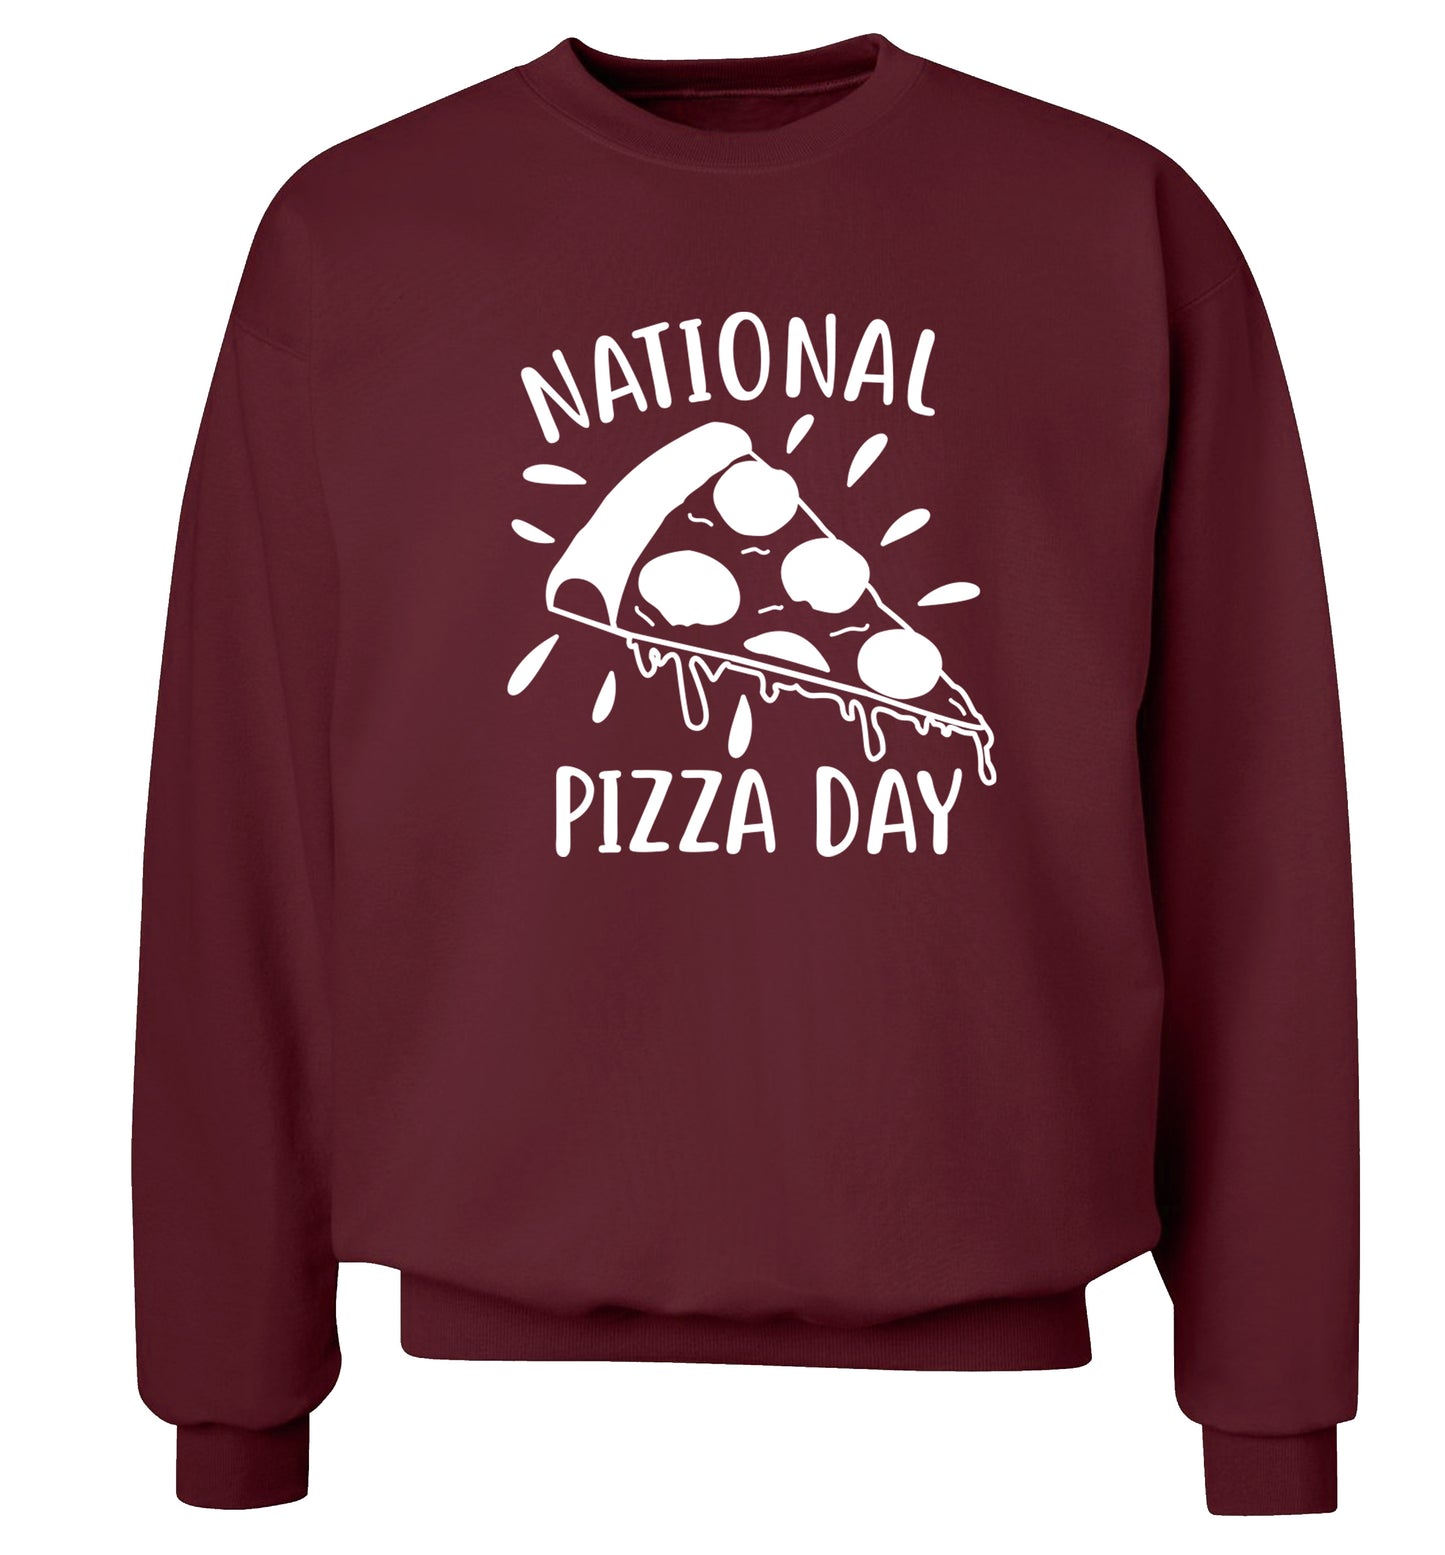 National pizza day Adult's unisex maroon Sweater 2XL